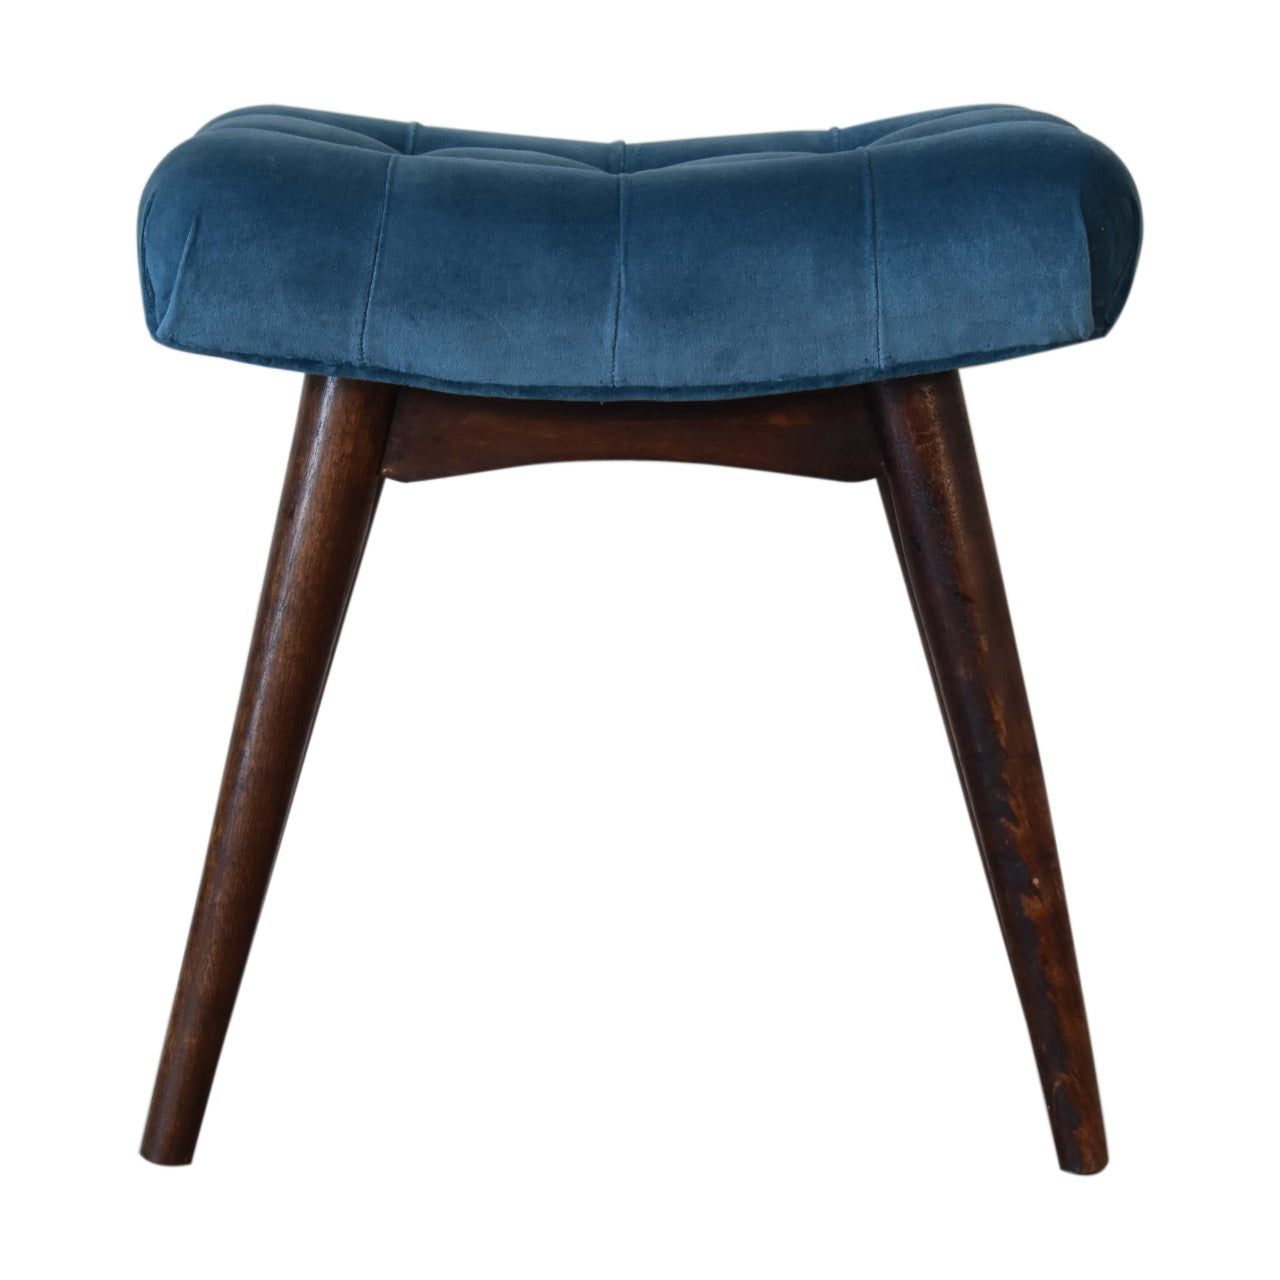 View Mini Teal Cotton Velvet Curved Bench information